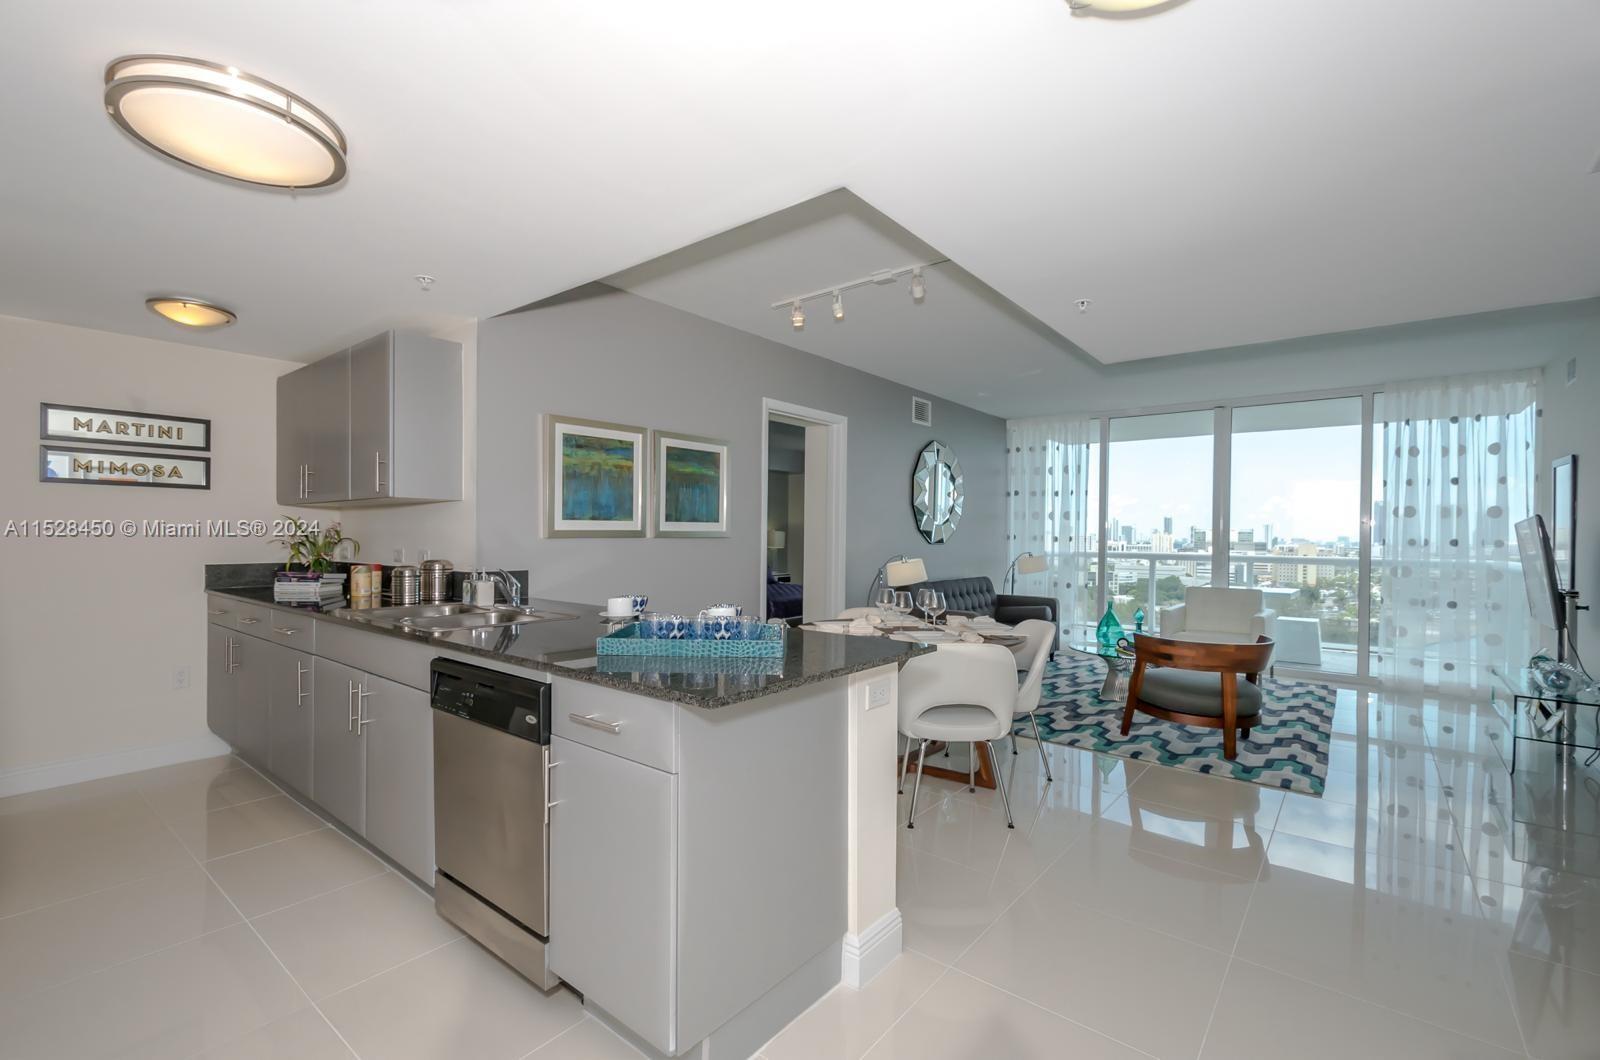 Photo of 1861 NW S River Dr #1207 in Miami, FL